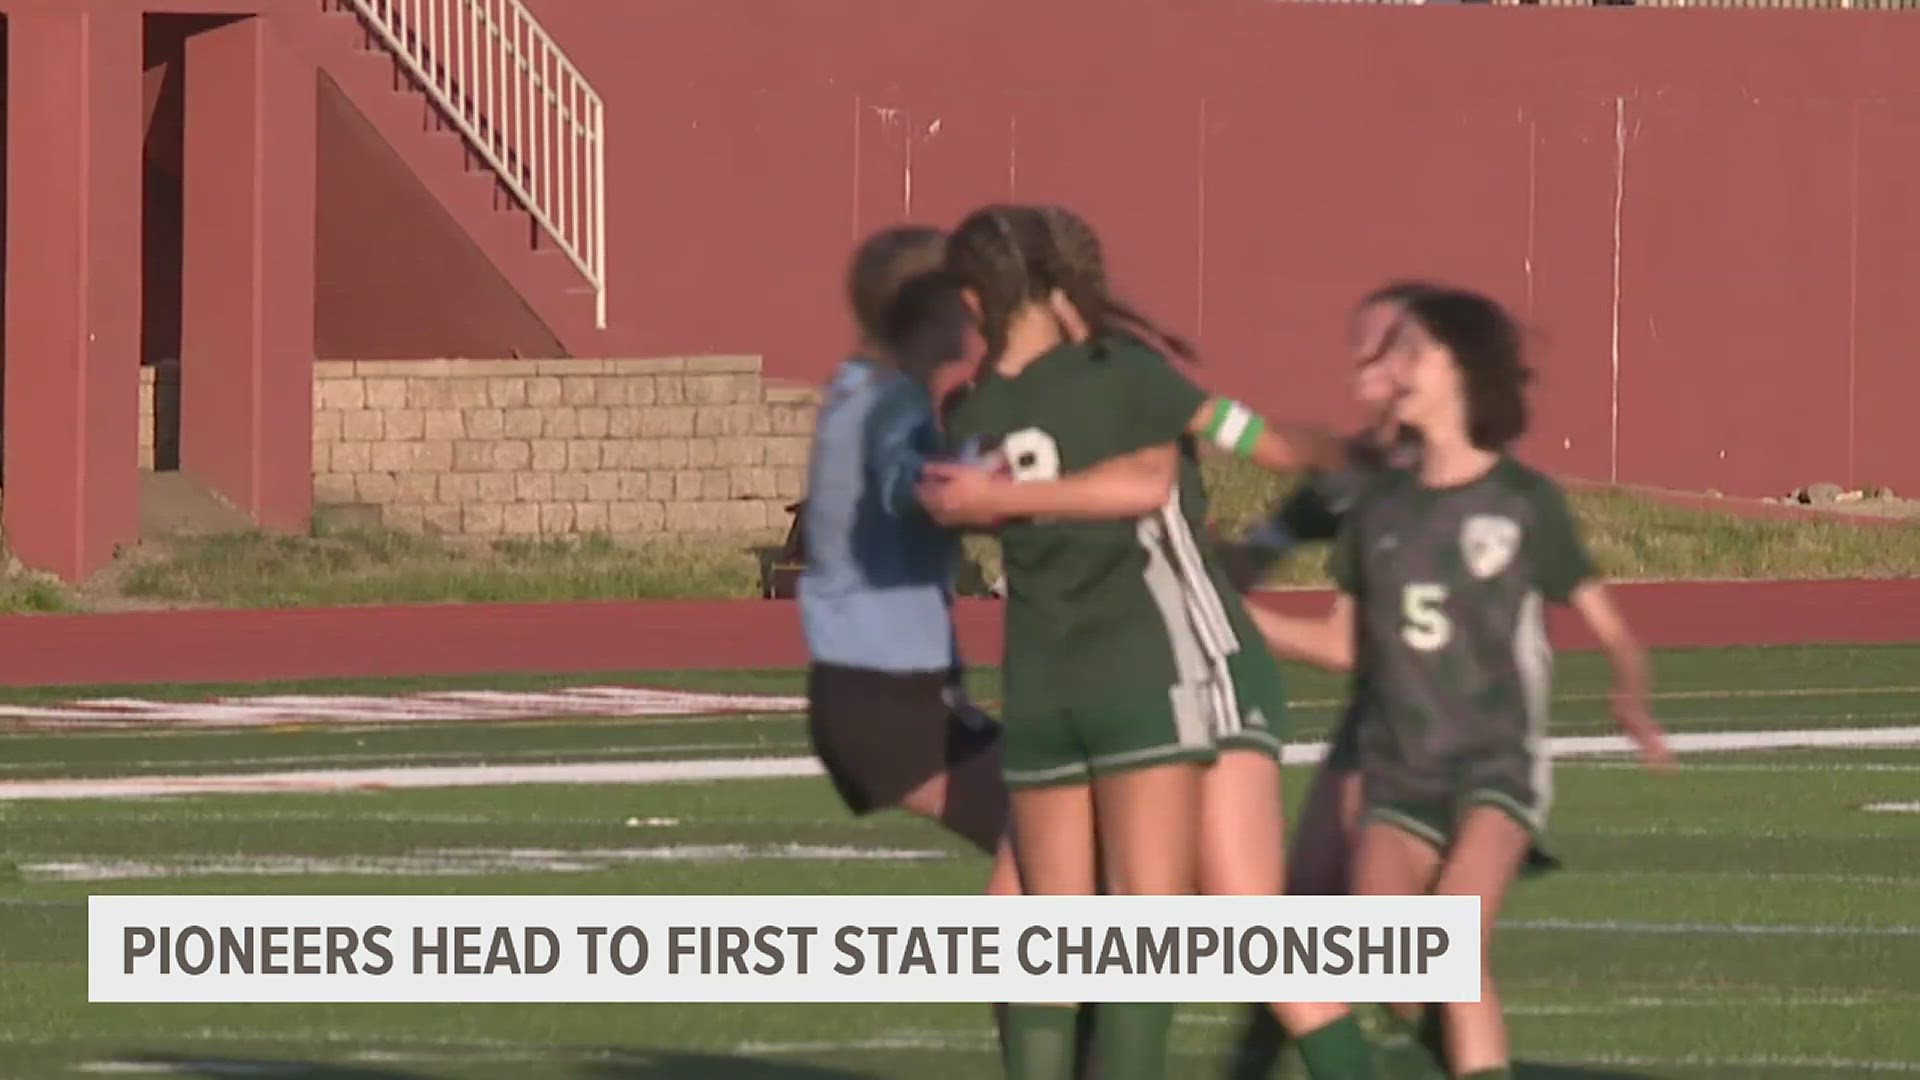 Alleman beats IC Catholic in the 1A State Soccer Semifinals 1-nil. The Pioneers scored on all 5 of their penalty kicks, while Clair Hulke made one stop for the win.